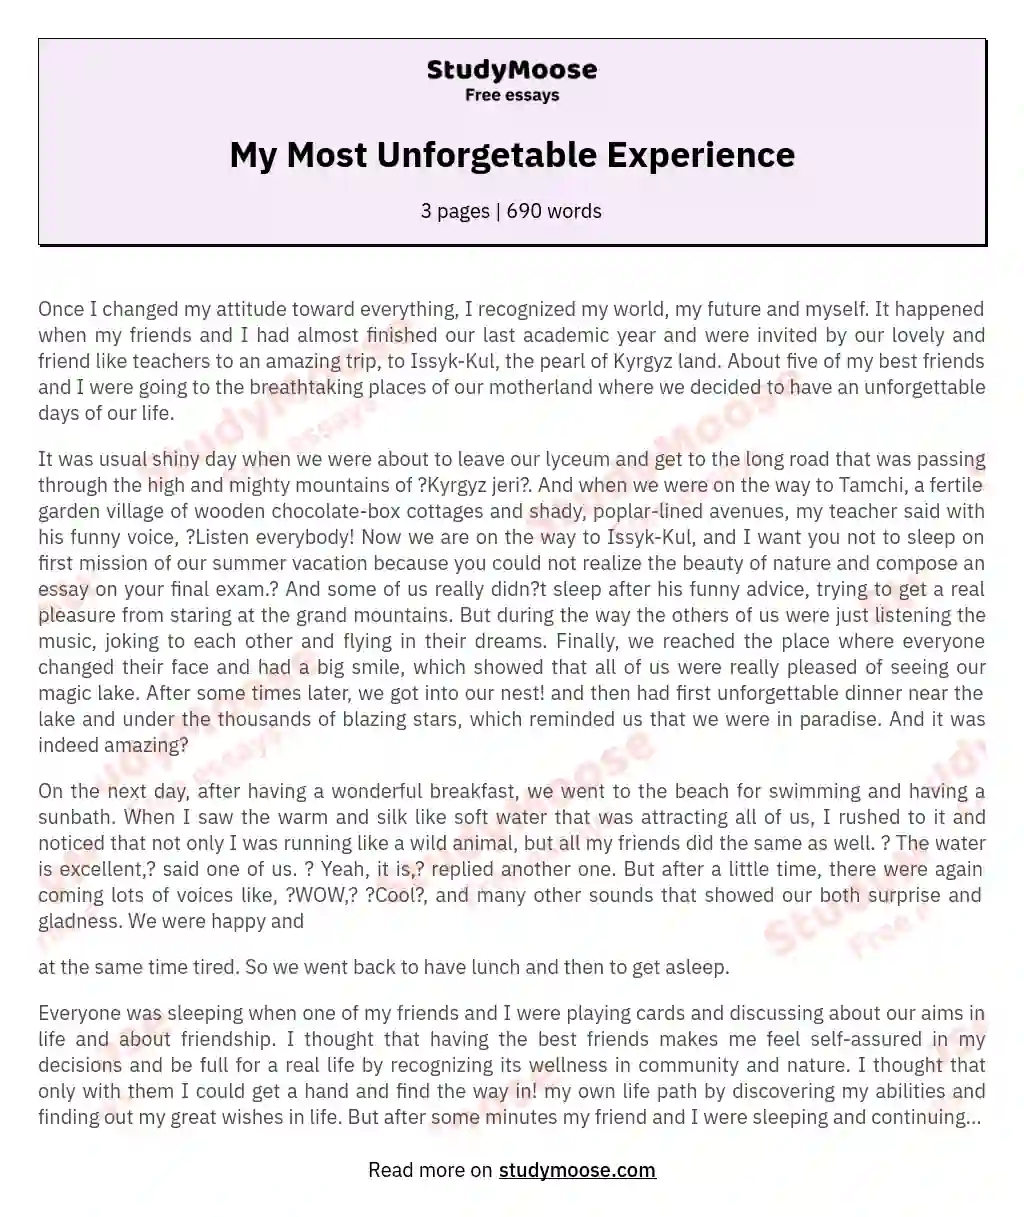 My Most Unforgetable Experience essay